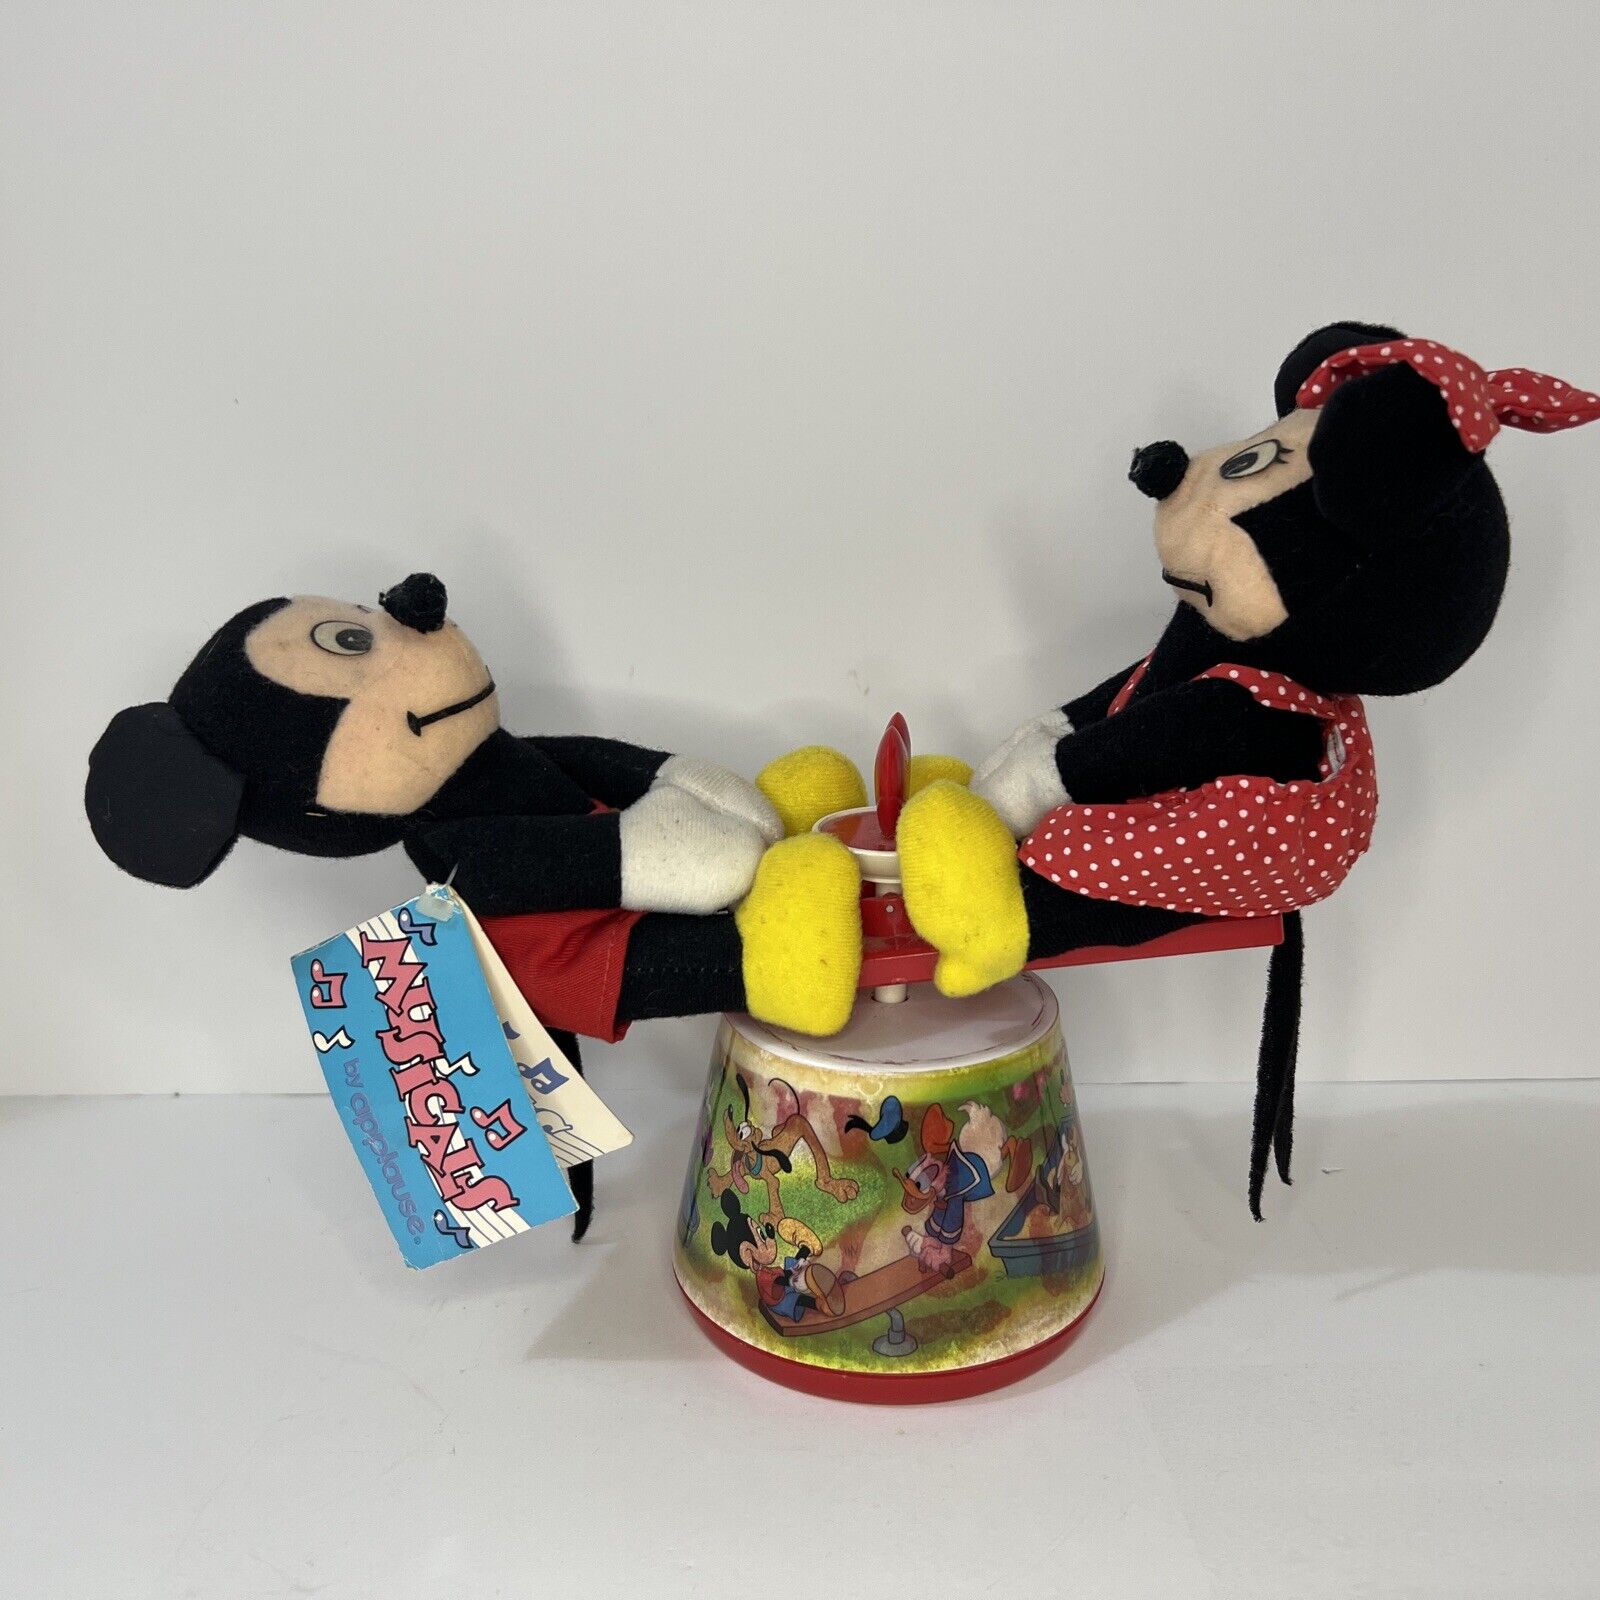 Vintage Applause Wind Up Musical Mickey & Minnie Mouse Musical March See Saw \'85